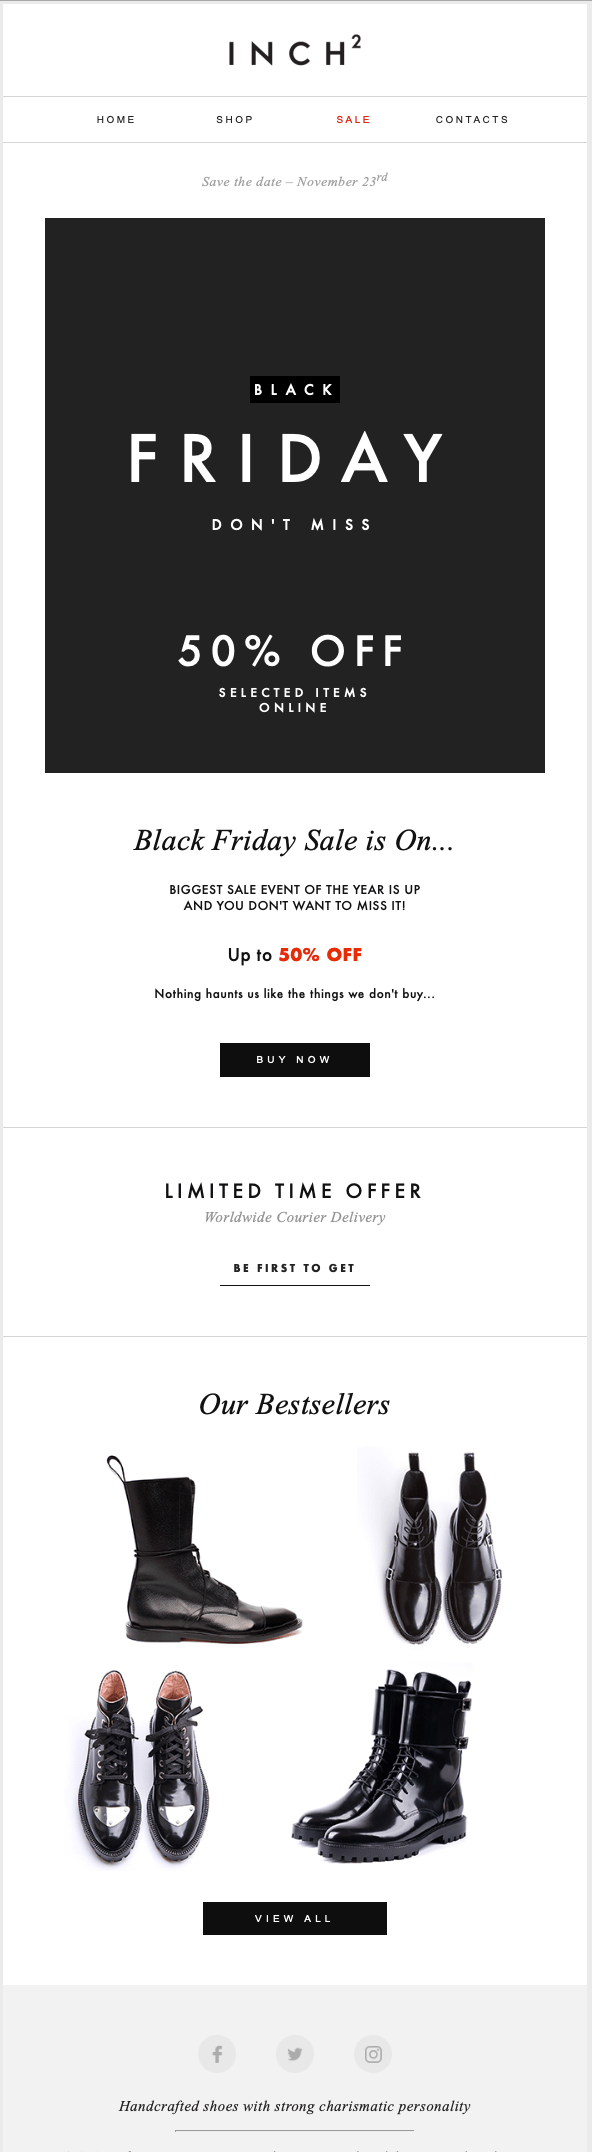 inch black friday email campaign